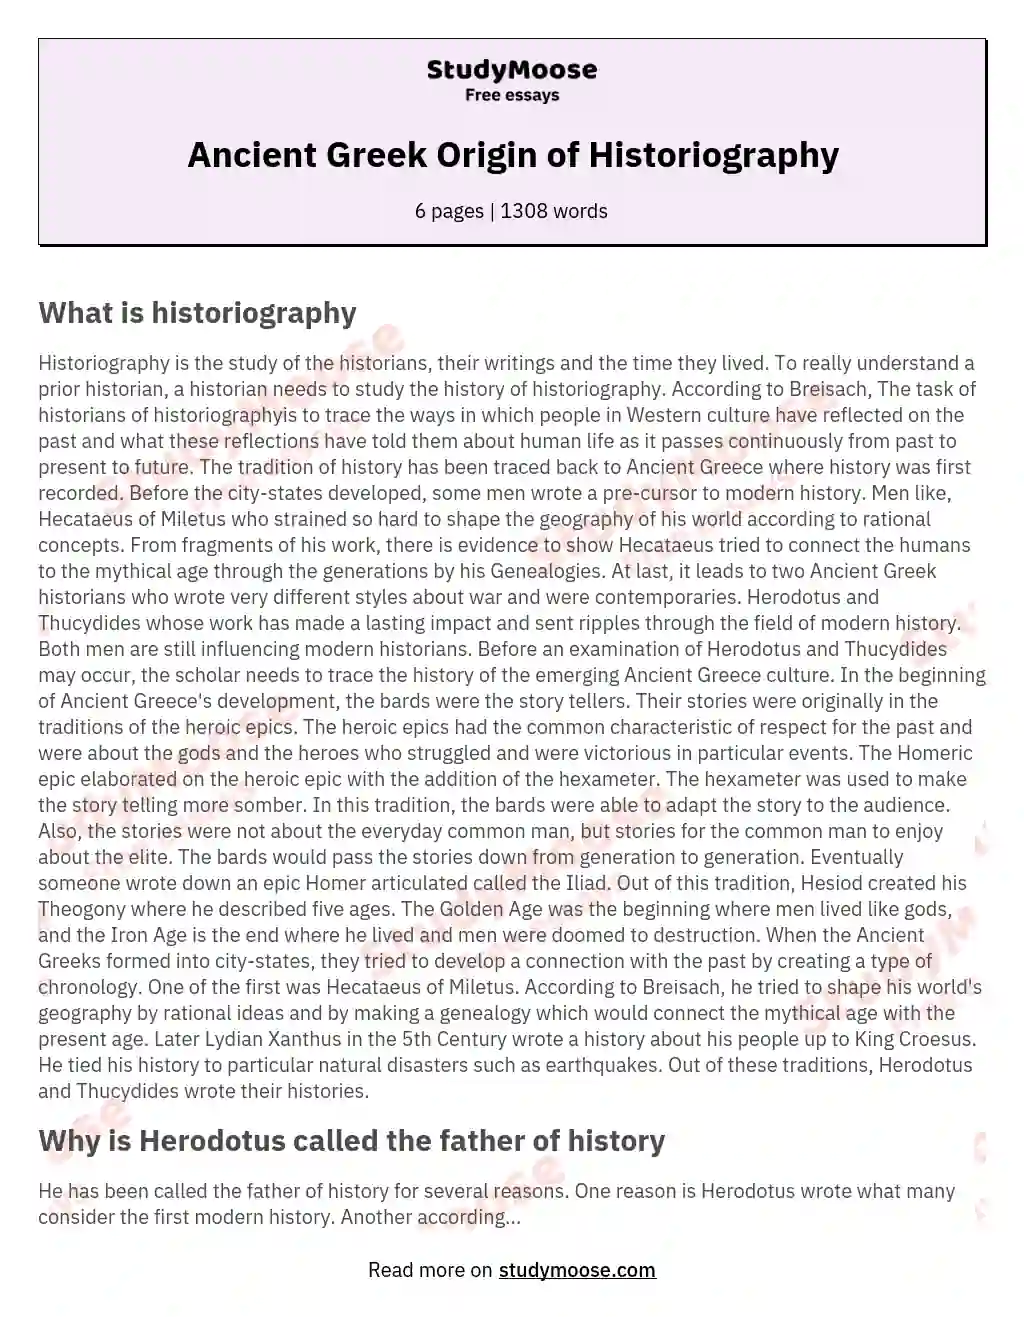 an example of a historiography essay